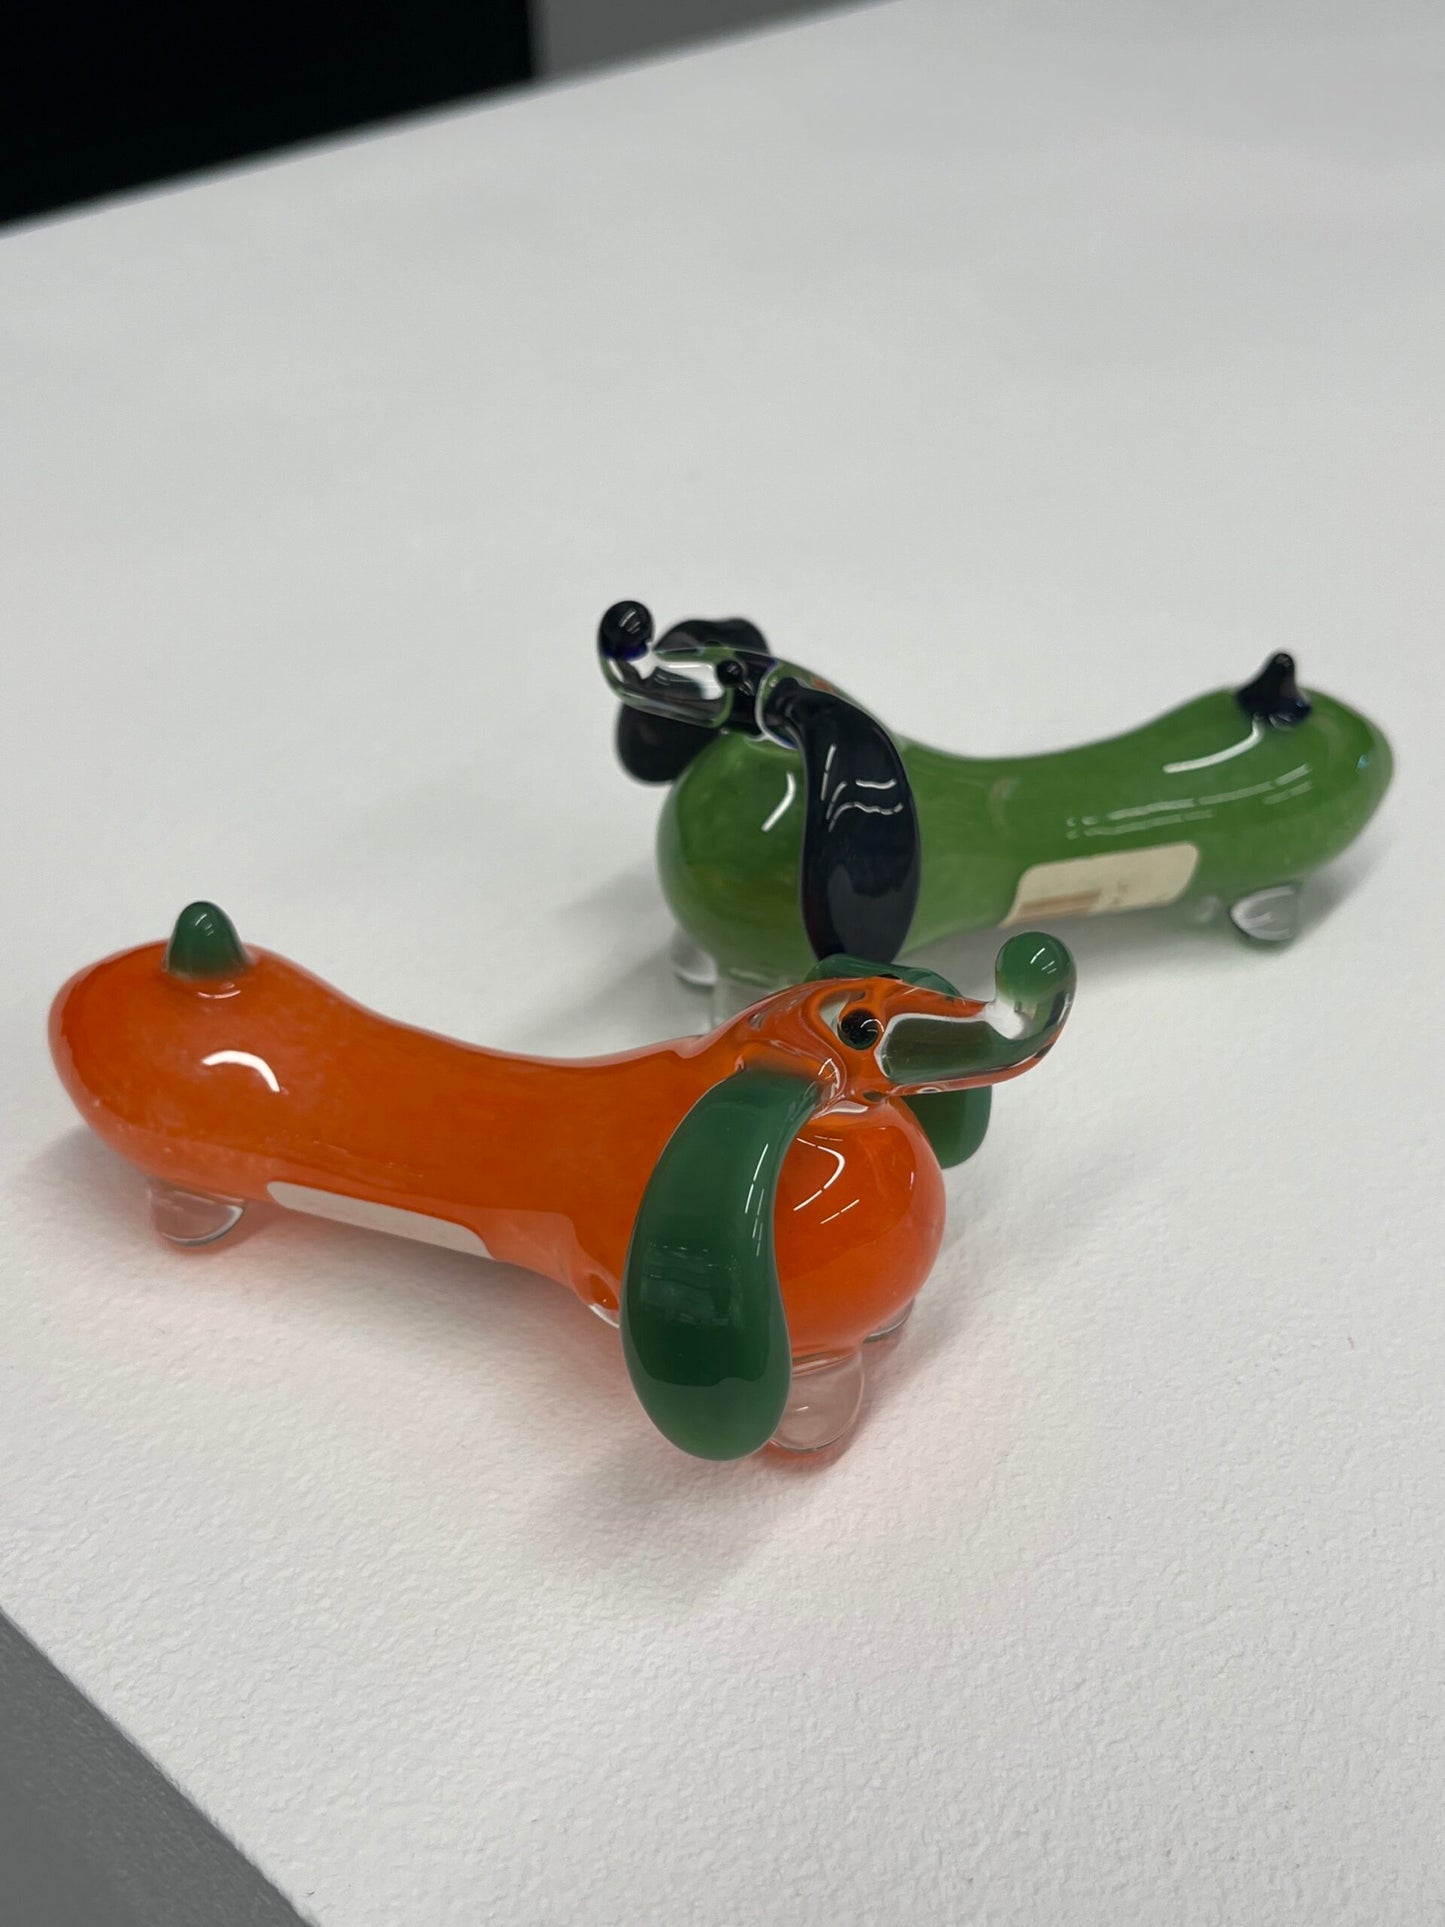 exquisite design of the Dachshund Hand Pipe 4"